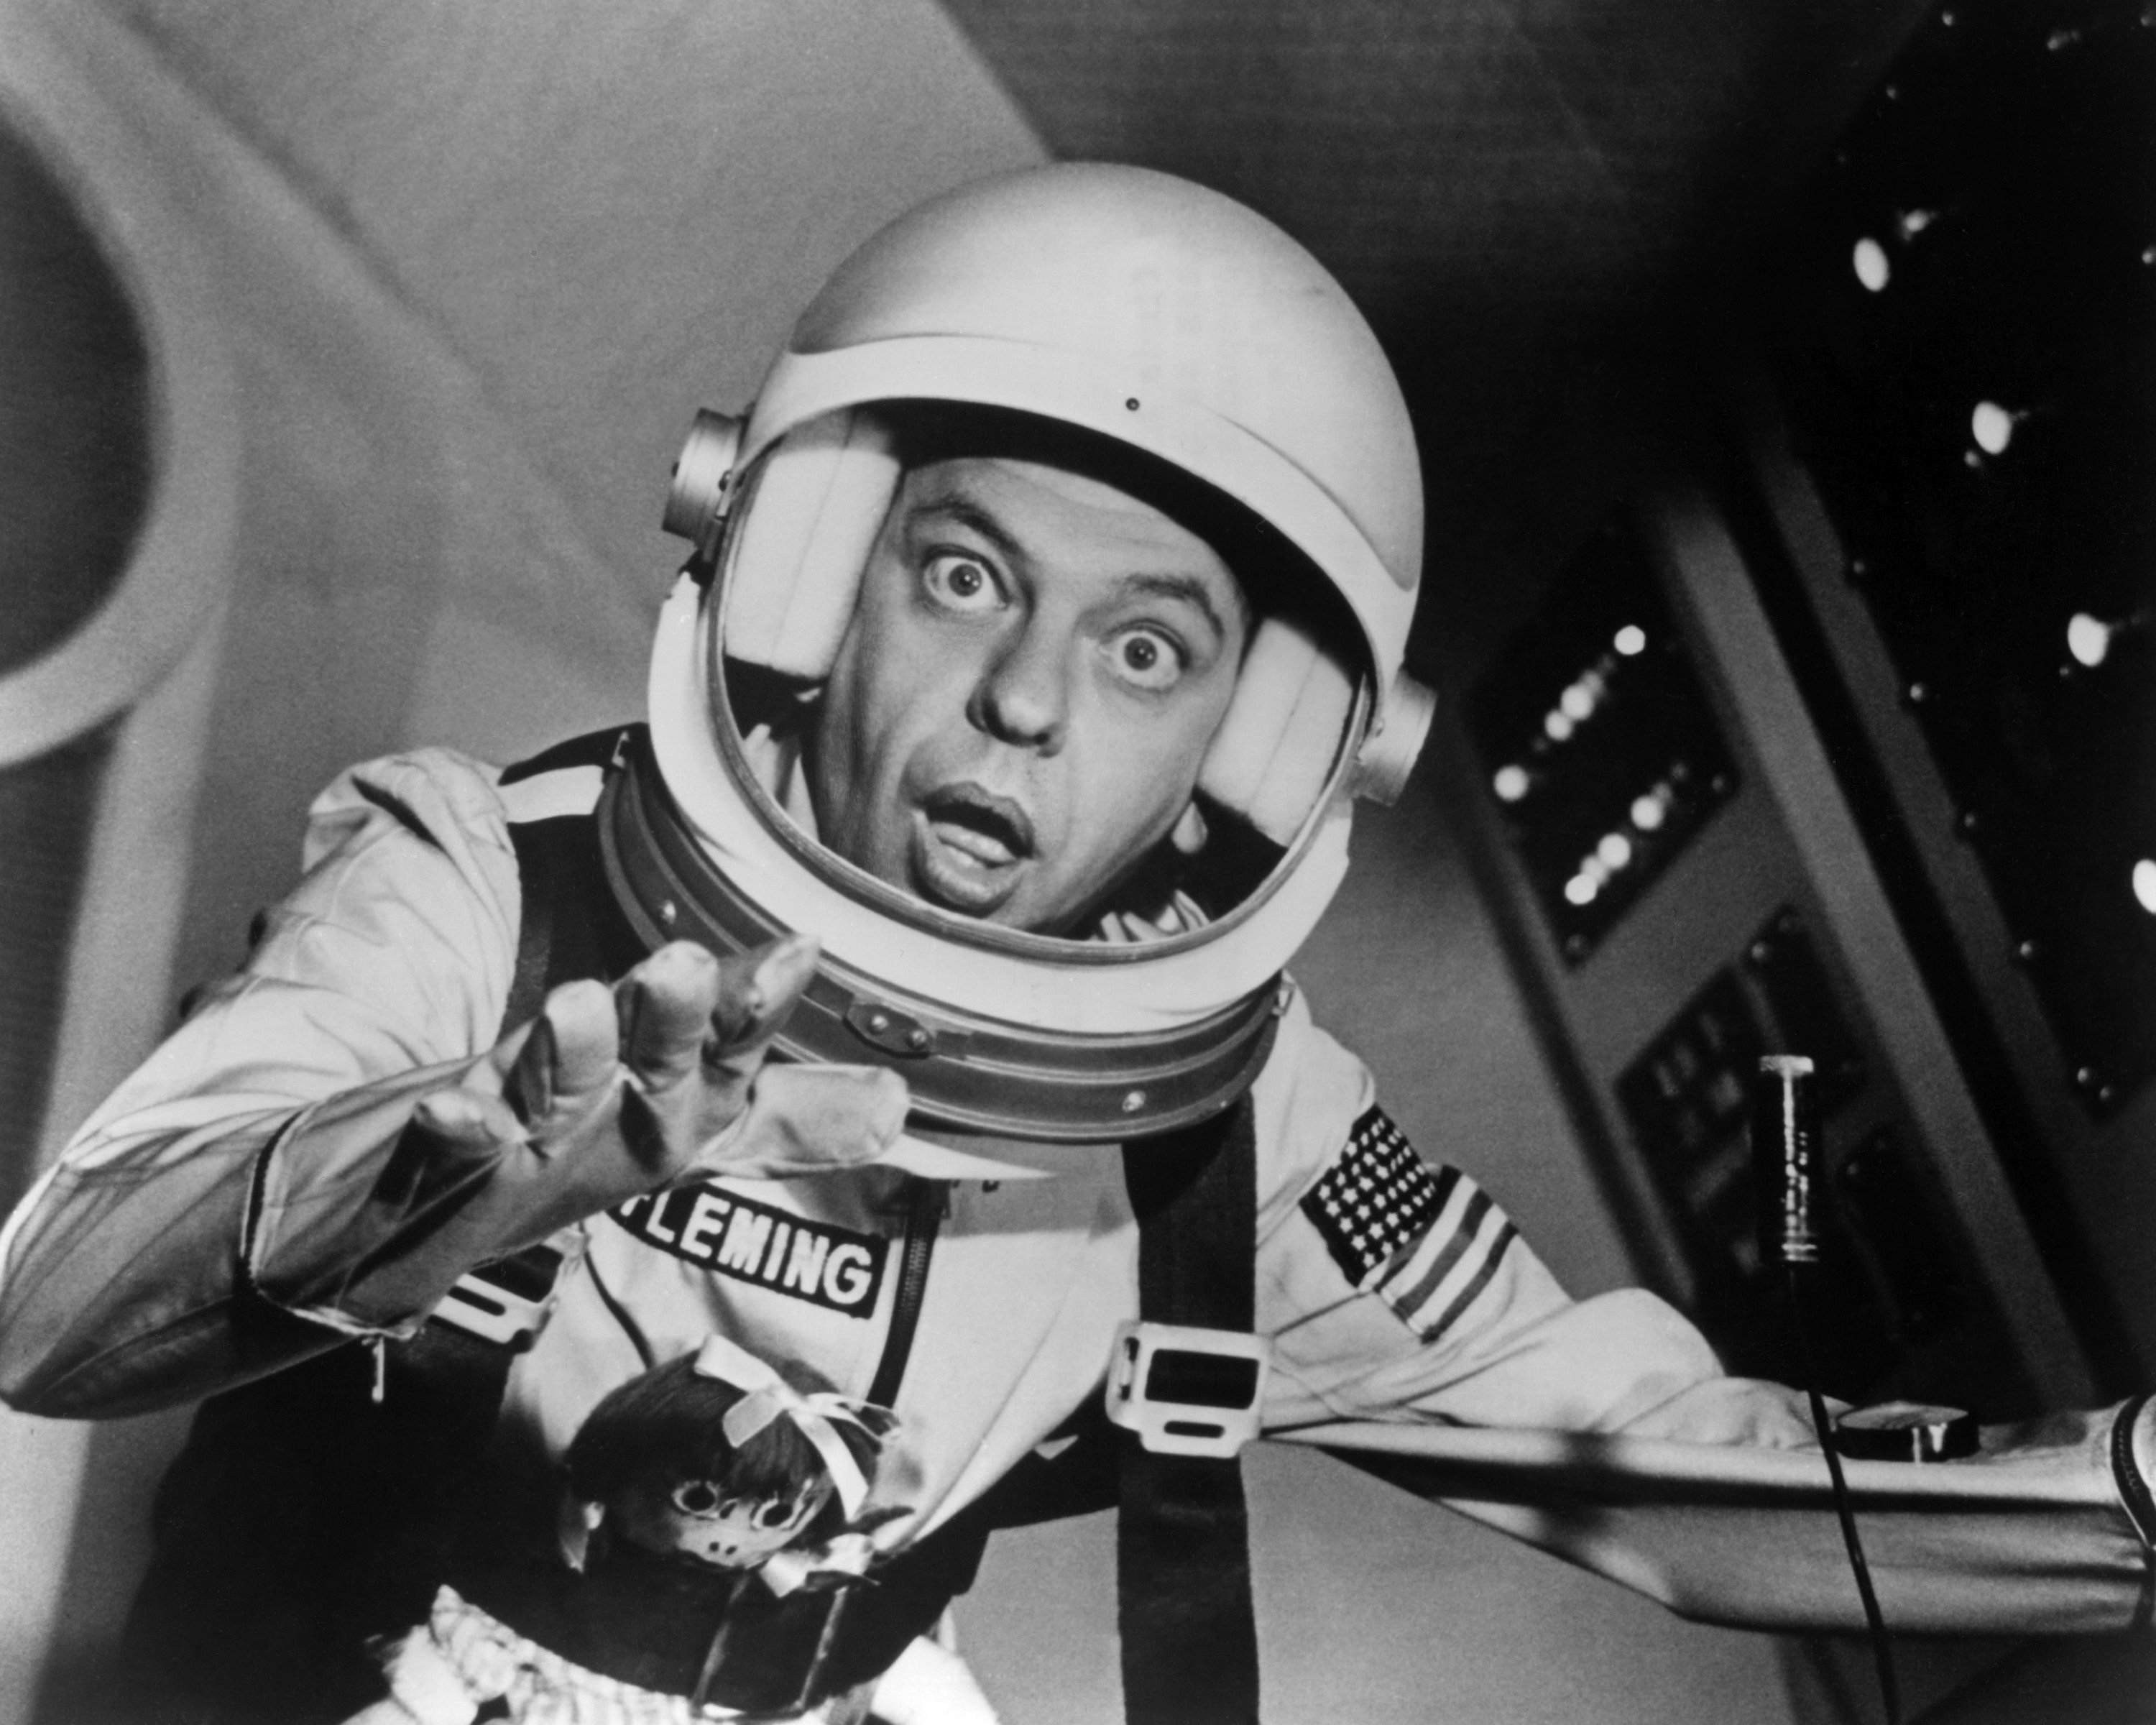 American actor and comedian Don Knotts (1924 - 2006) as Roy Fleming in the film 'The Reluctant Astronaut', 1967. | Source: Getty Images